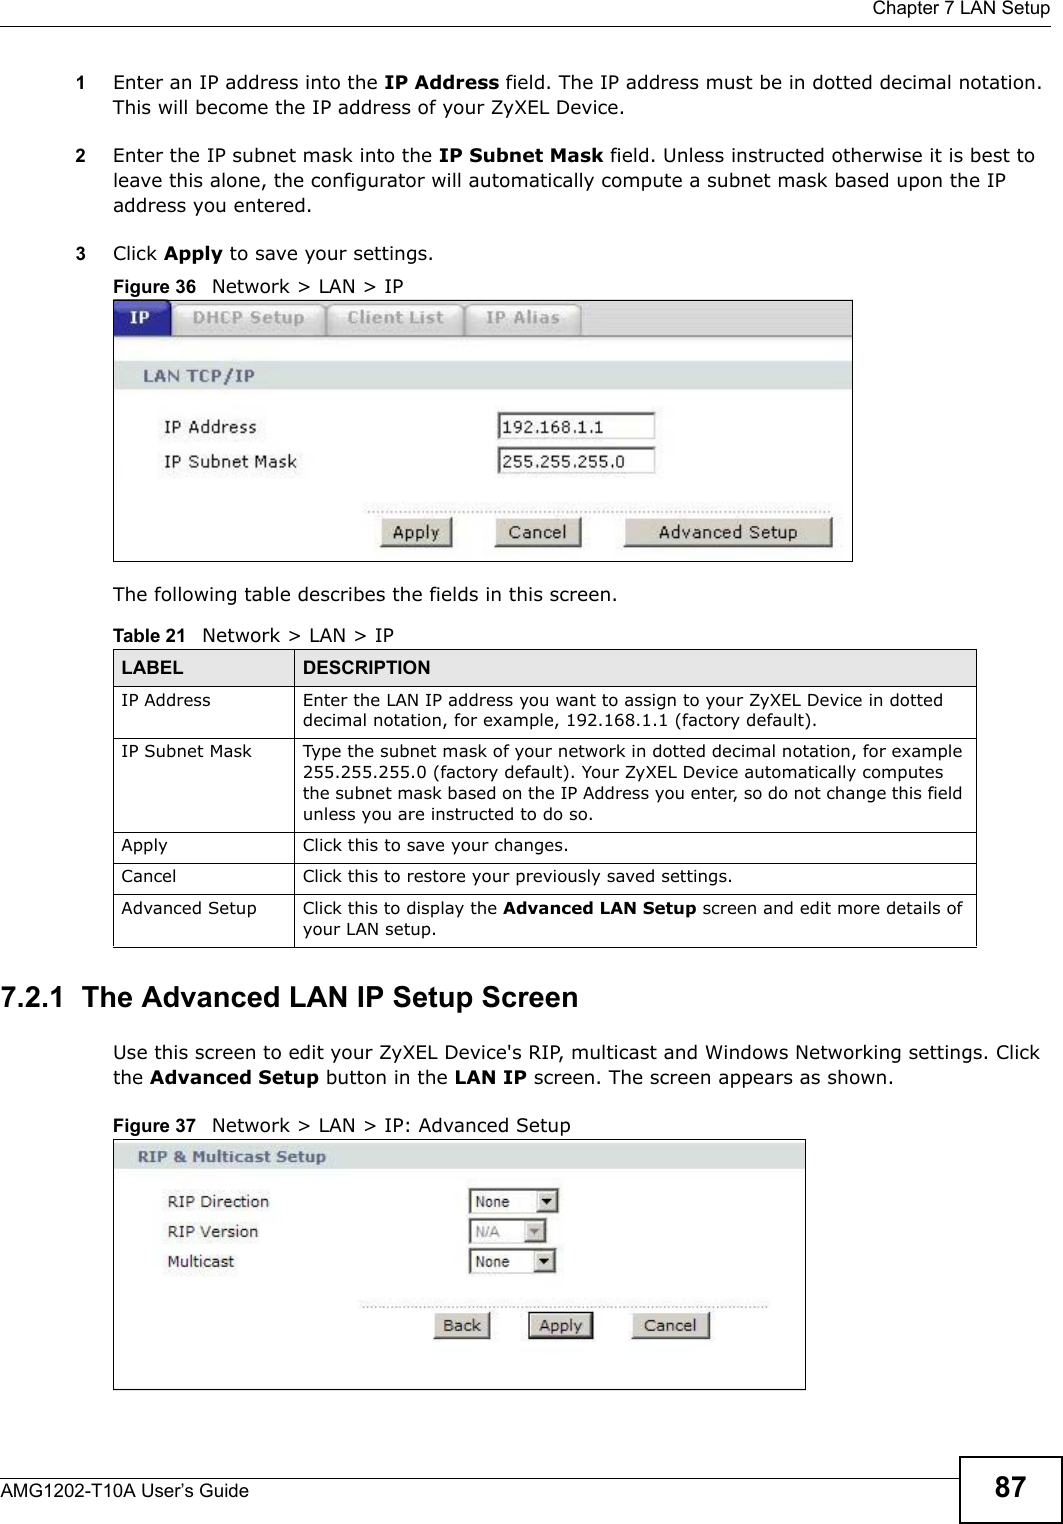  Chapter 7 LAN SetupAMG1202-T10A User’s Guide 871Enter an IP address into the IP Address field. The IP address must be in dotted decimal notation. This will become the IP address of your ZyXEL Device.2Enter the IP subnet mask into the IP Subnet Mask field. Unless instructed otherwise it is best to leave this alone, the configurator will automatically compute a subnet mask based upon the IP address you entered.3Click Apply to save your settings.Figure 36   Network &gt; LAN &gt; IPThe following table describes the fields in this screen.  7.2.1  The Advanced LAN IP Setup Screen Use this screen to edit your ZyXEL Device&apos;s RIP, multicast and Windows Networking settings. Click the Advanced Setup button in the LAN IP screen. The screen appears as shown.Figure 37   Network &gt; LAN &gt; IP: Advanced SetupTable 21   Network &gt; LAN &gt; IPLABEL DESCRIPTIONIP Address Enter the LAN IP address you want to assign to your ZyXEL Device in dotted decimal notation, for example, 192.168.1.1 (factory default). IP Subnet Mask  Type the subnet mask of your network in dotted decimal notation, for example 255.255.255.0 (factory default). Your ZyXEL Device automatically computes the subnet mask based on the IP Address you enter, so do not change this field unless you are instructed to do so.Apply Click this to save your changes.Cancel Click this to restore your previously saved settings.Advanced Setup Click this to display the Advanced LAN Setup screen and edit more details of your LAN setup.